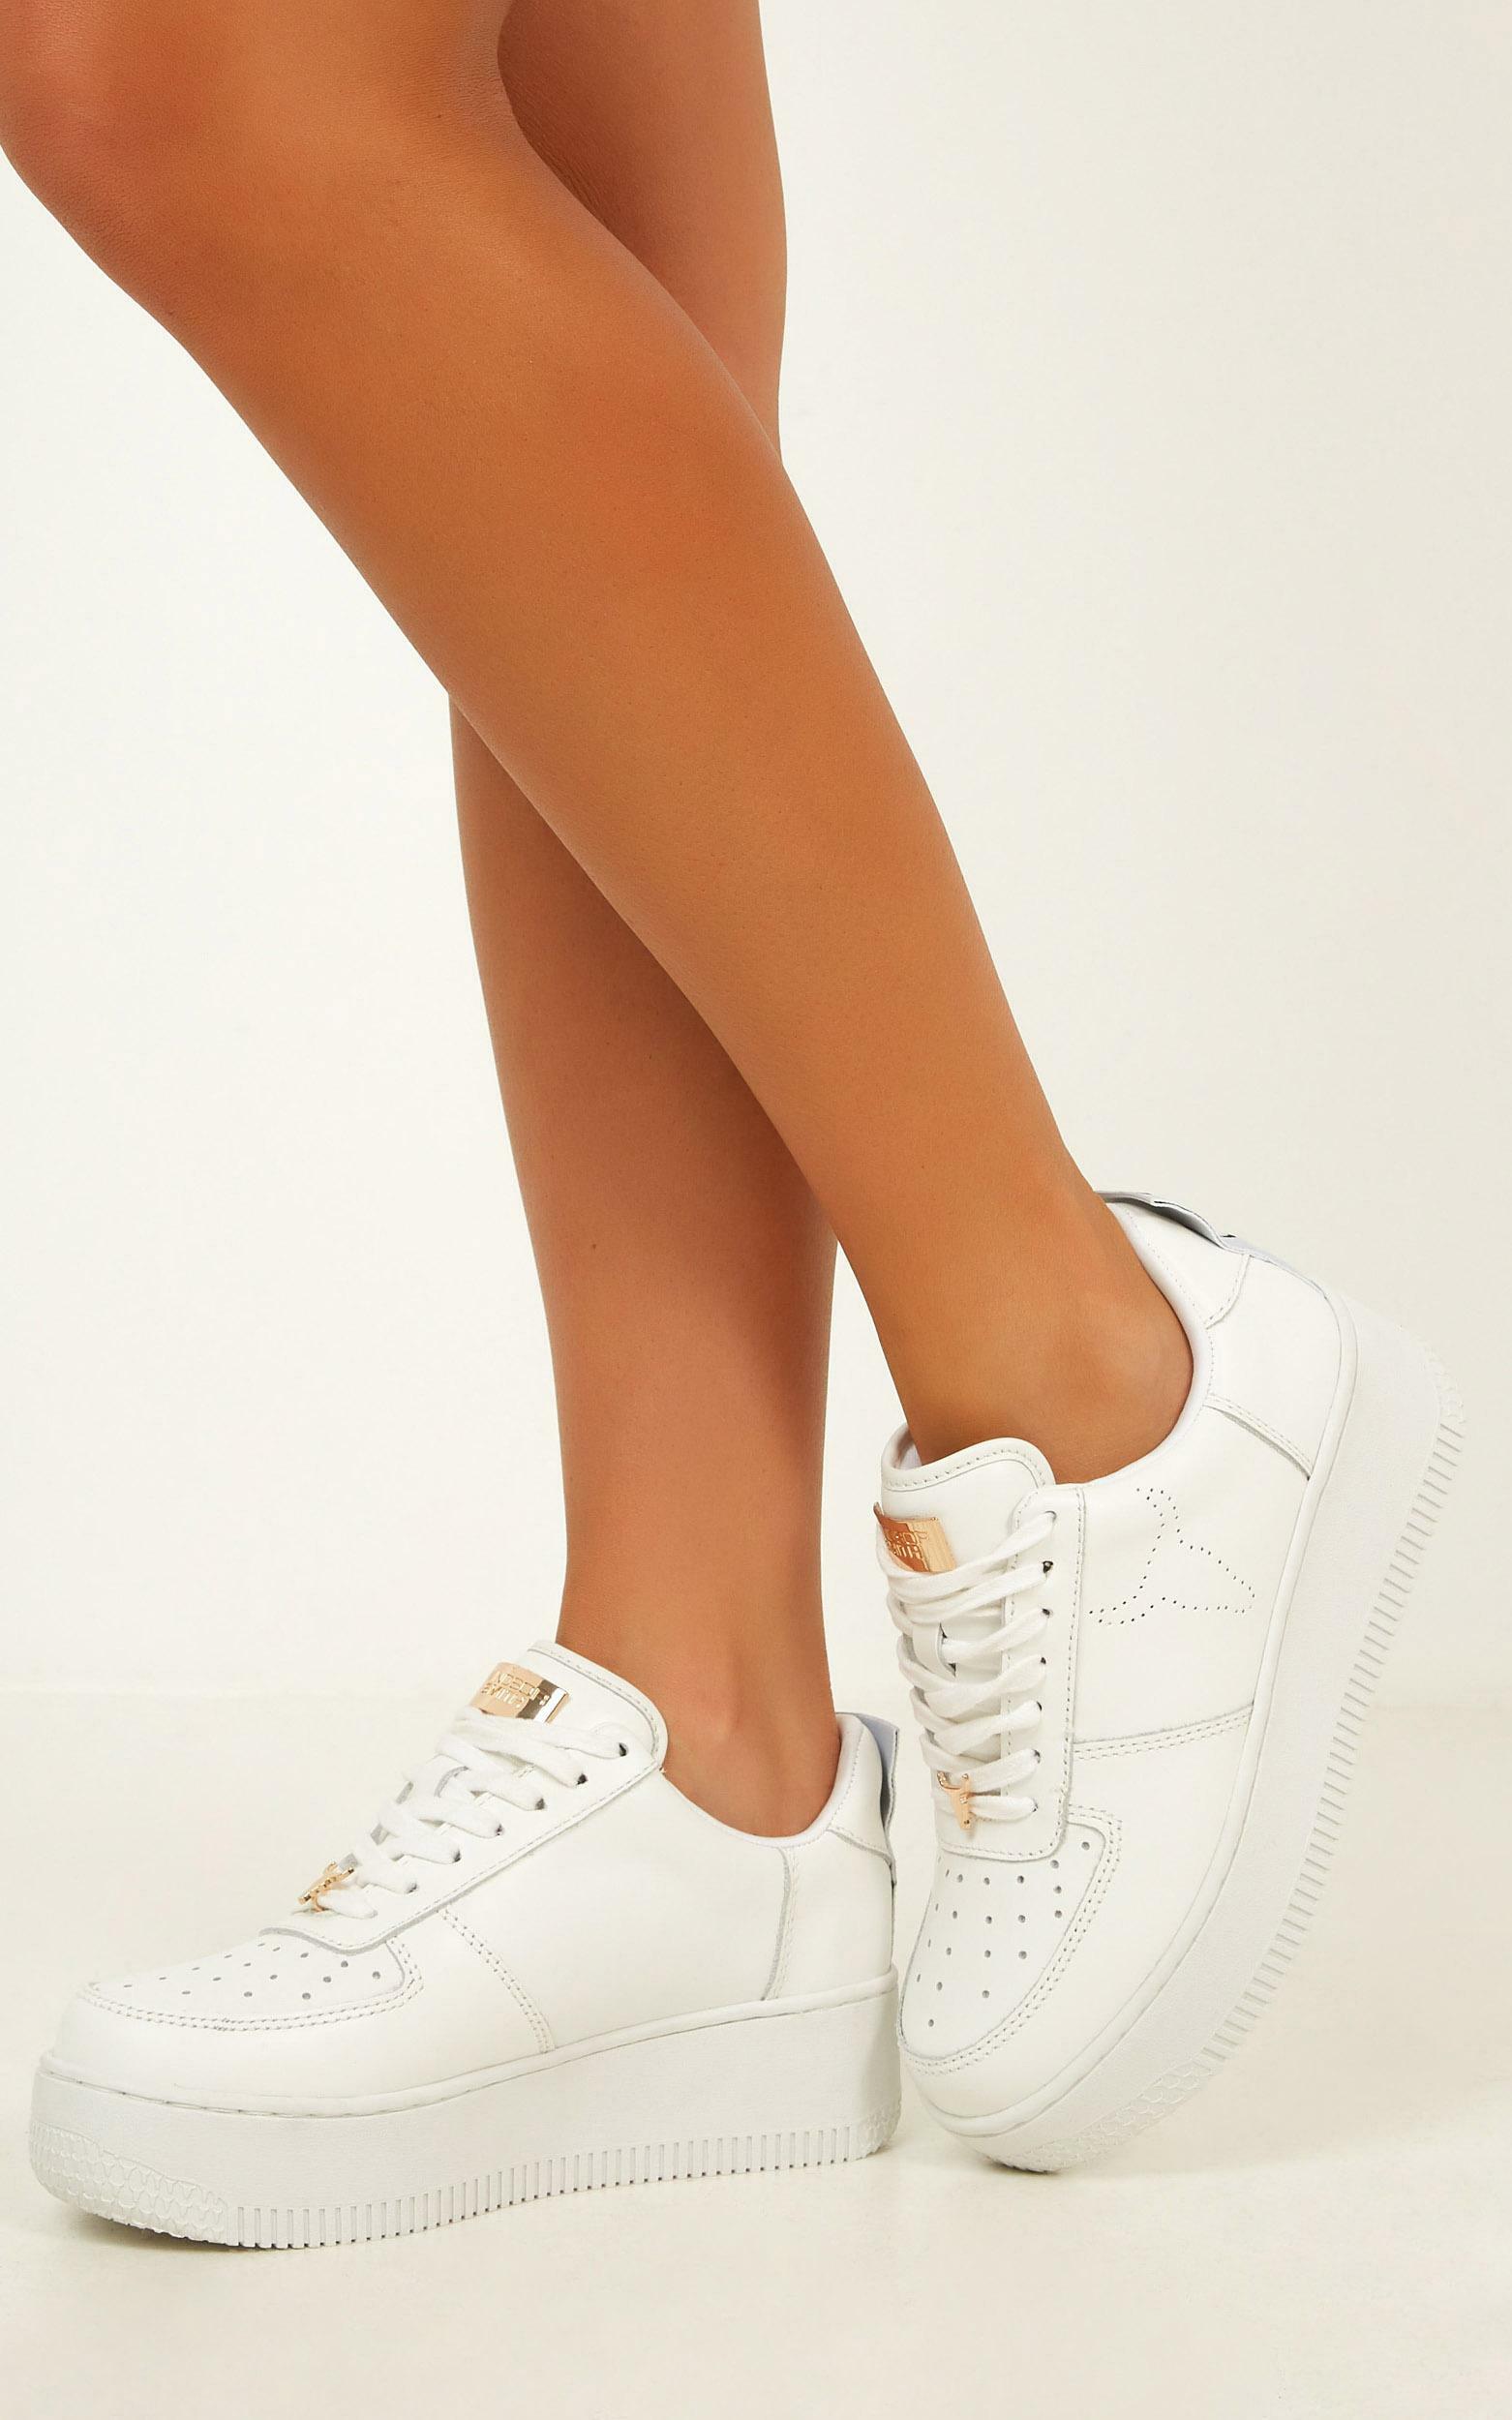 Windsor Smith - Racer Sneakers in white leather - 10, White, hi-res image number null